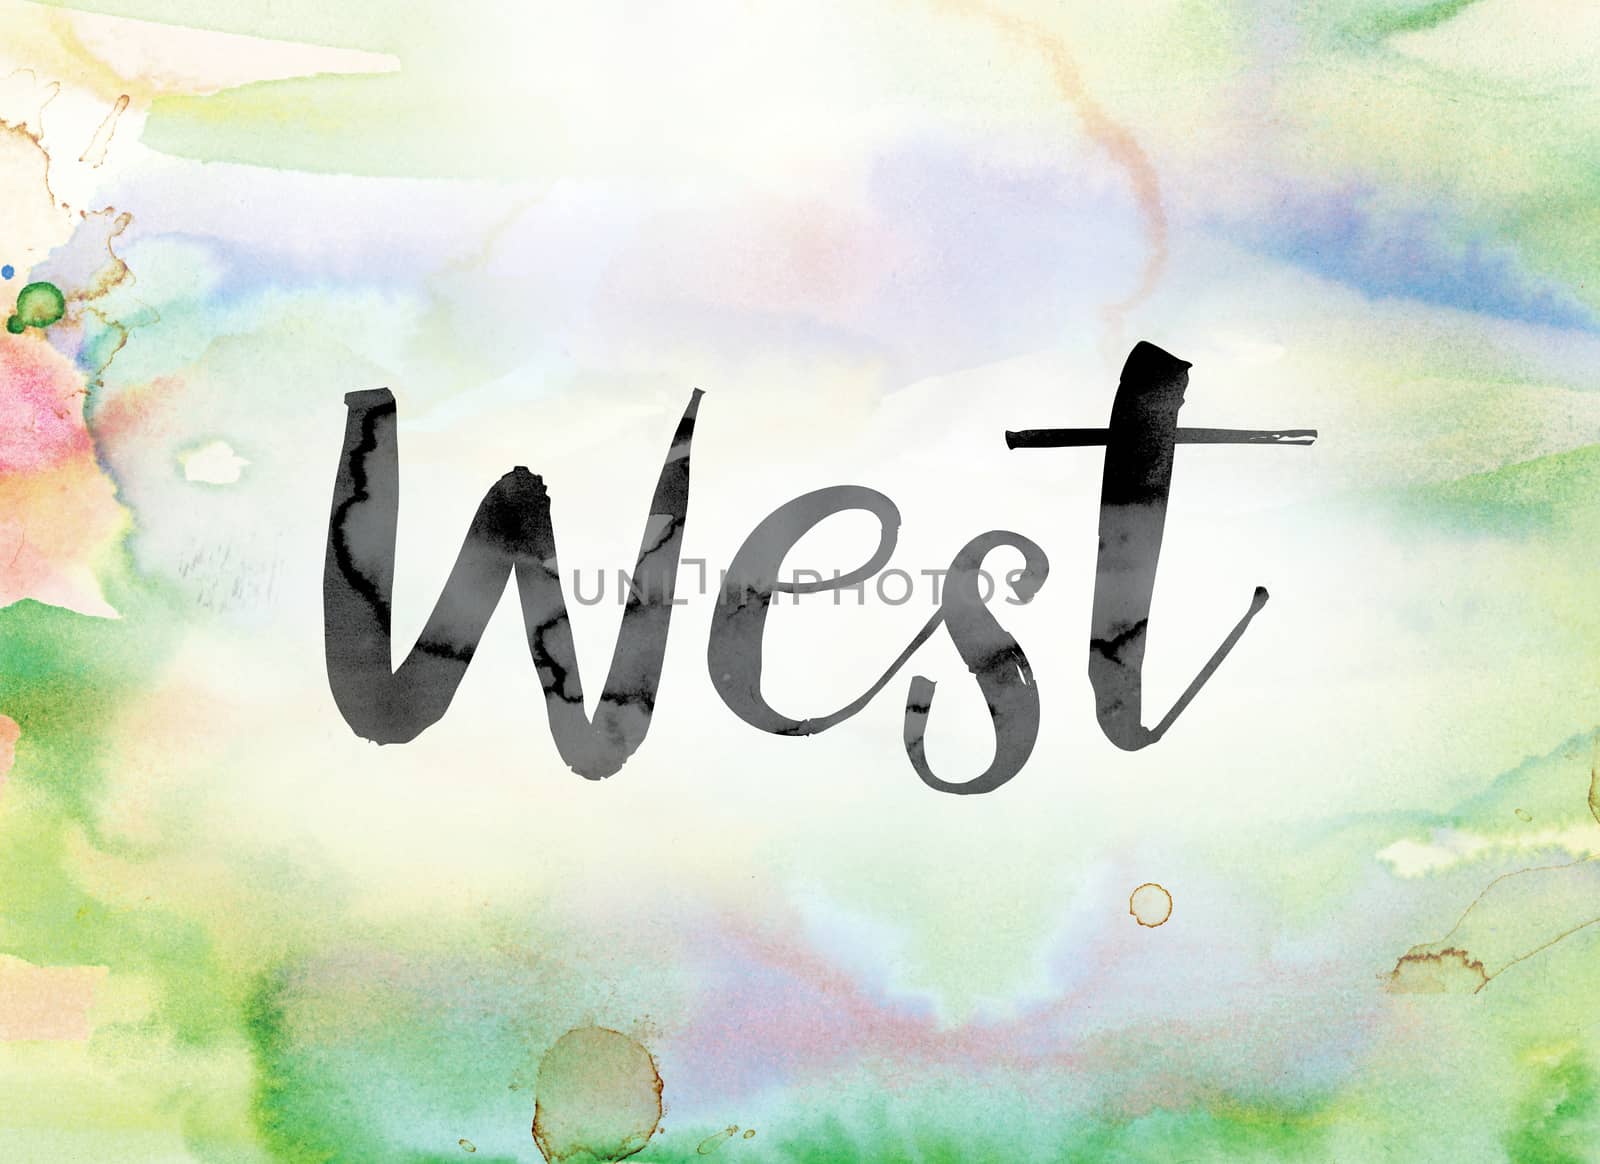 The word "West" painted in black ink over a colorful watercolor washed background concept and theme.